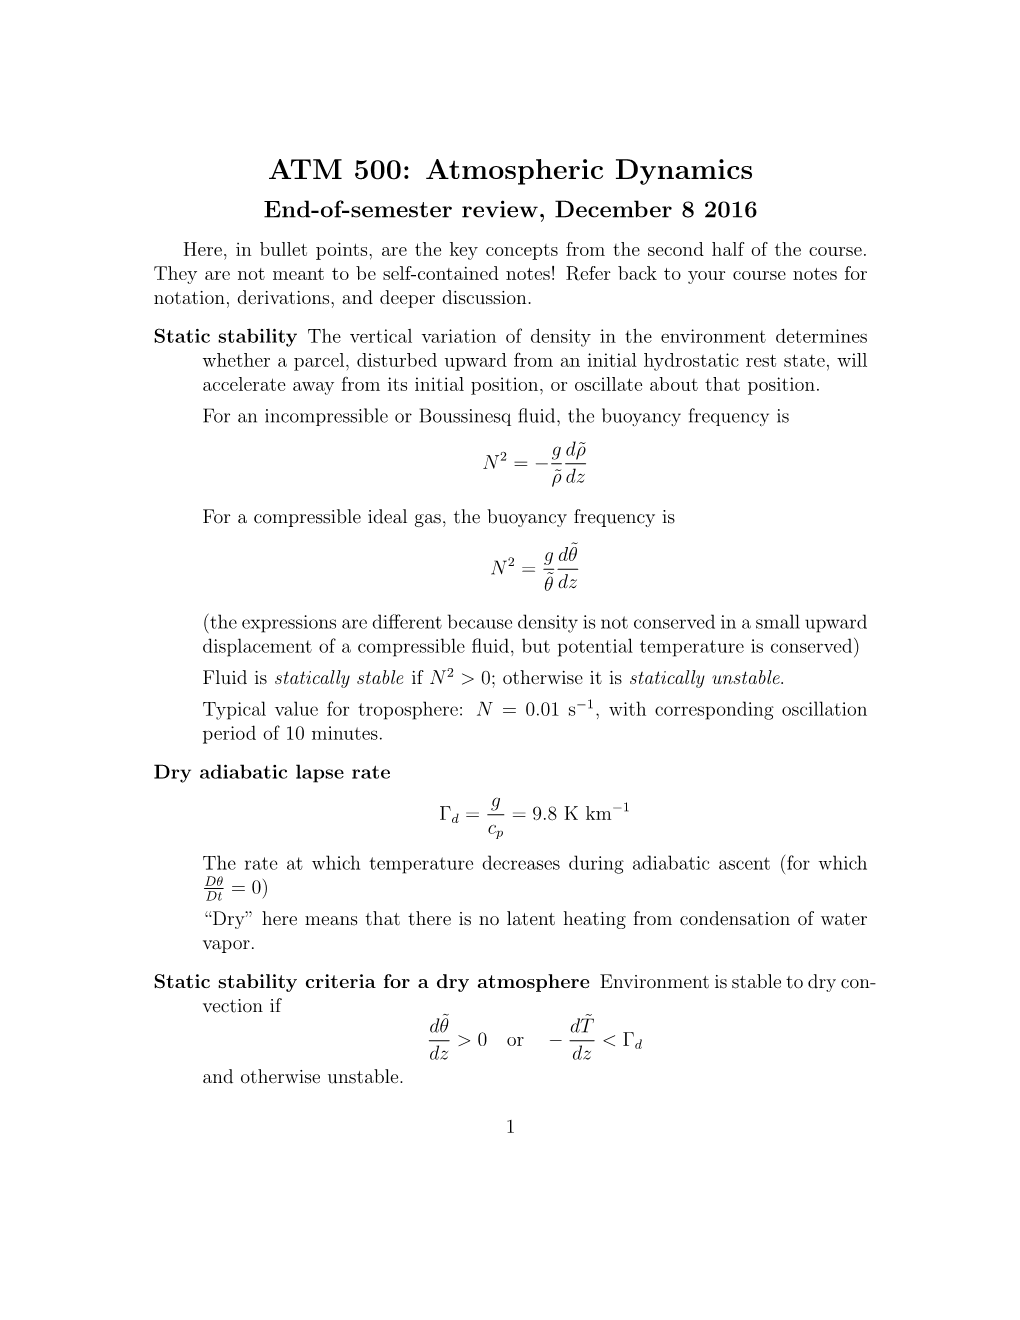 ATM 500: Atmospheric Dynamics End-Of-Semester Review, December 8 2016 Here, in Bullet Points, Are the Key Concepts from the Second Half of the Course